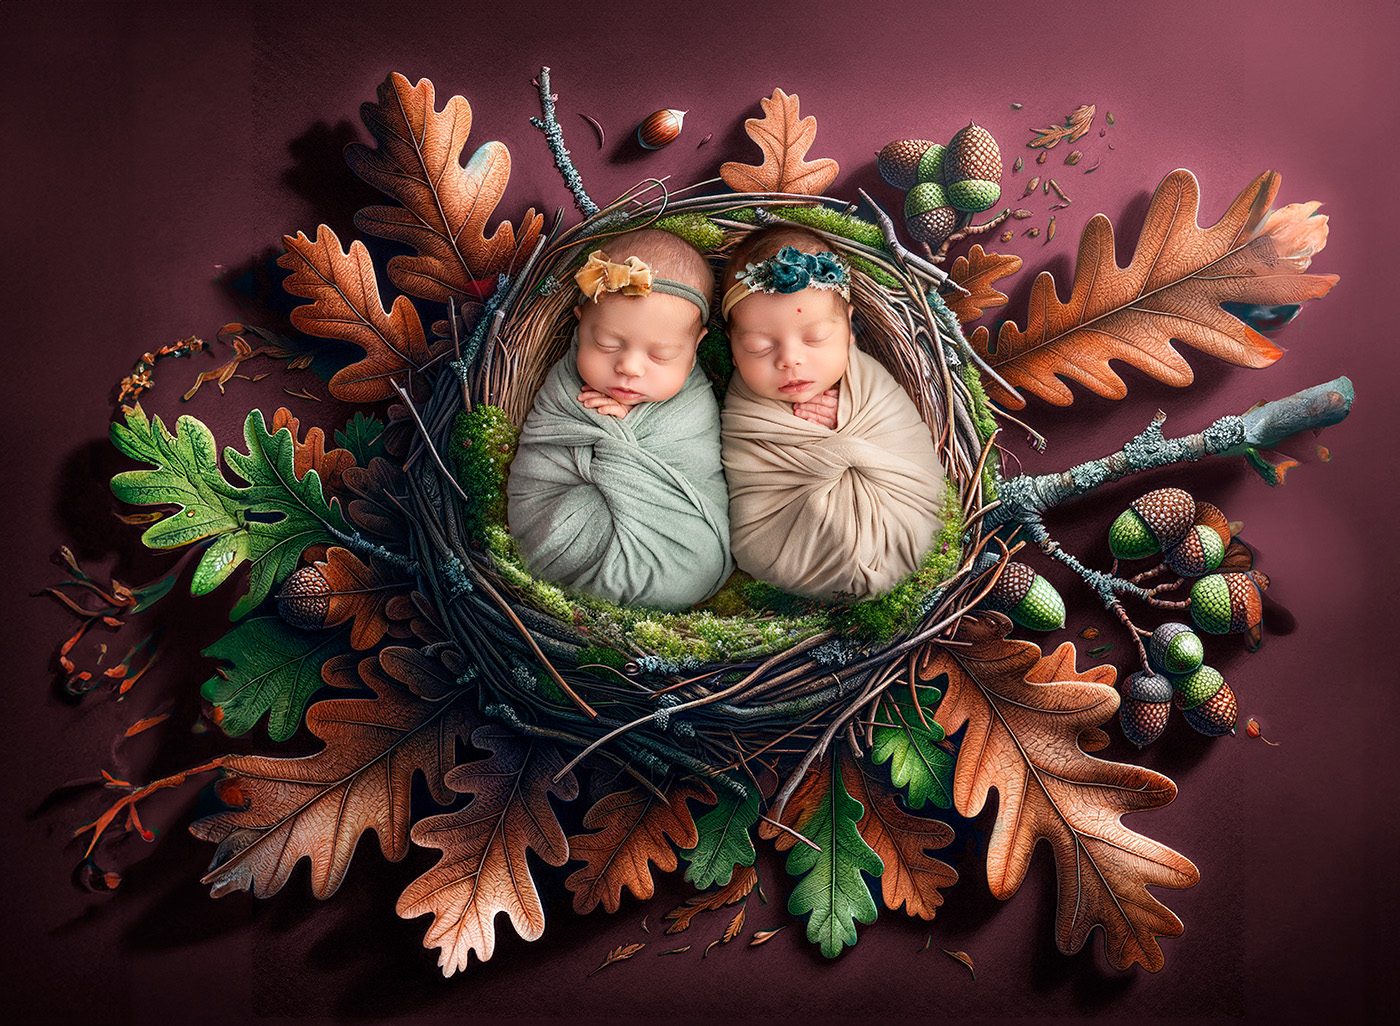 newborn twin photography twin baby girls sleeping in a woodland nest surrounded by oak leaves and acorns on a maroon background 